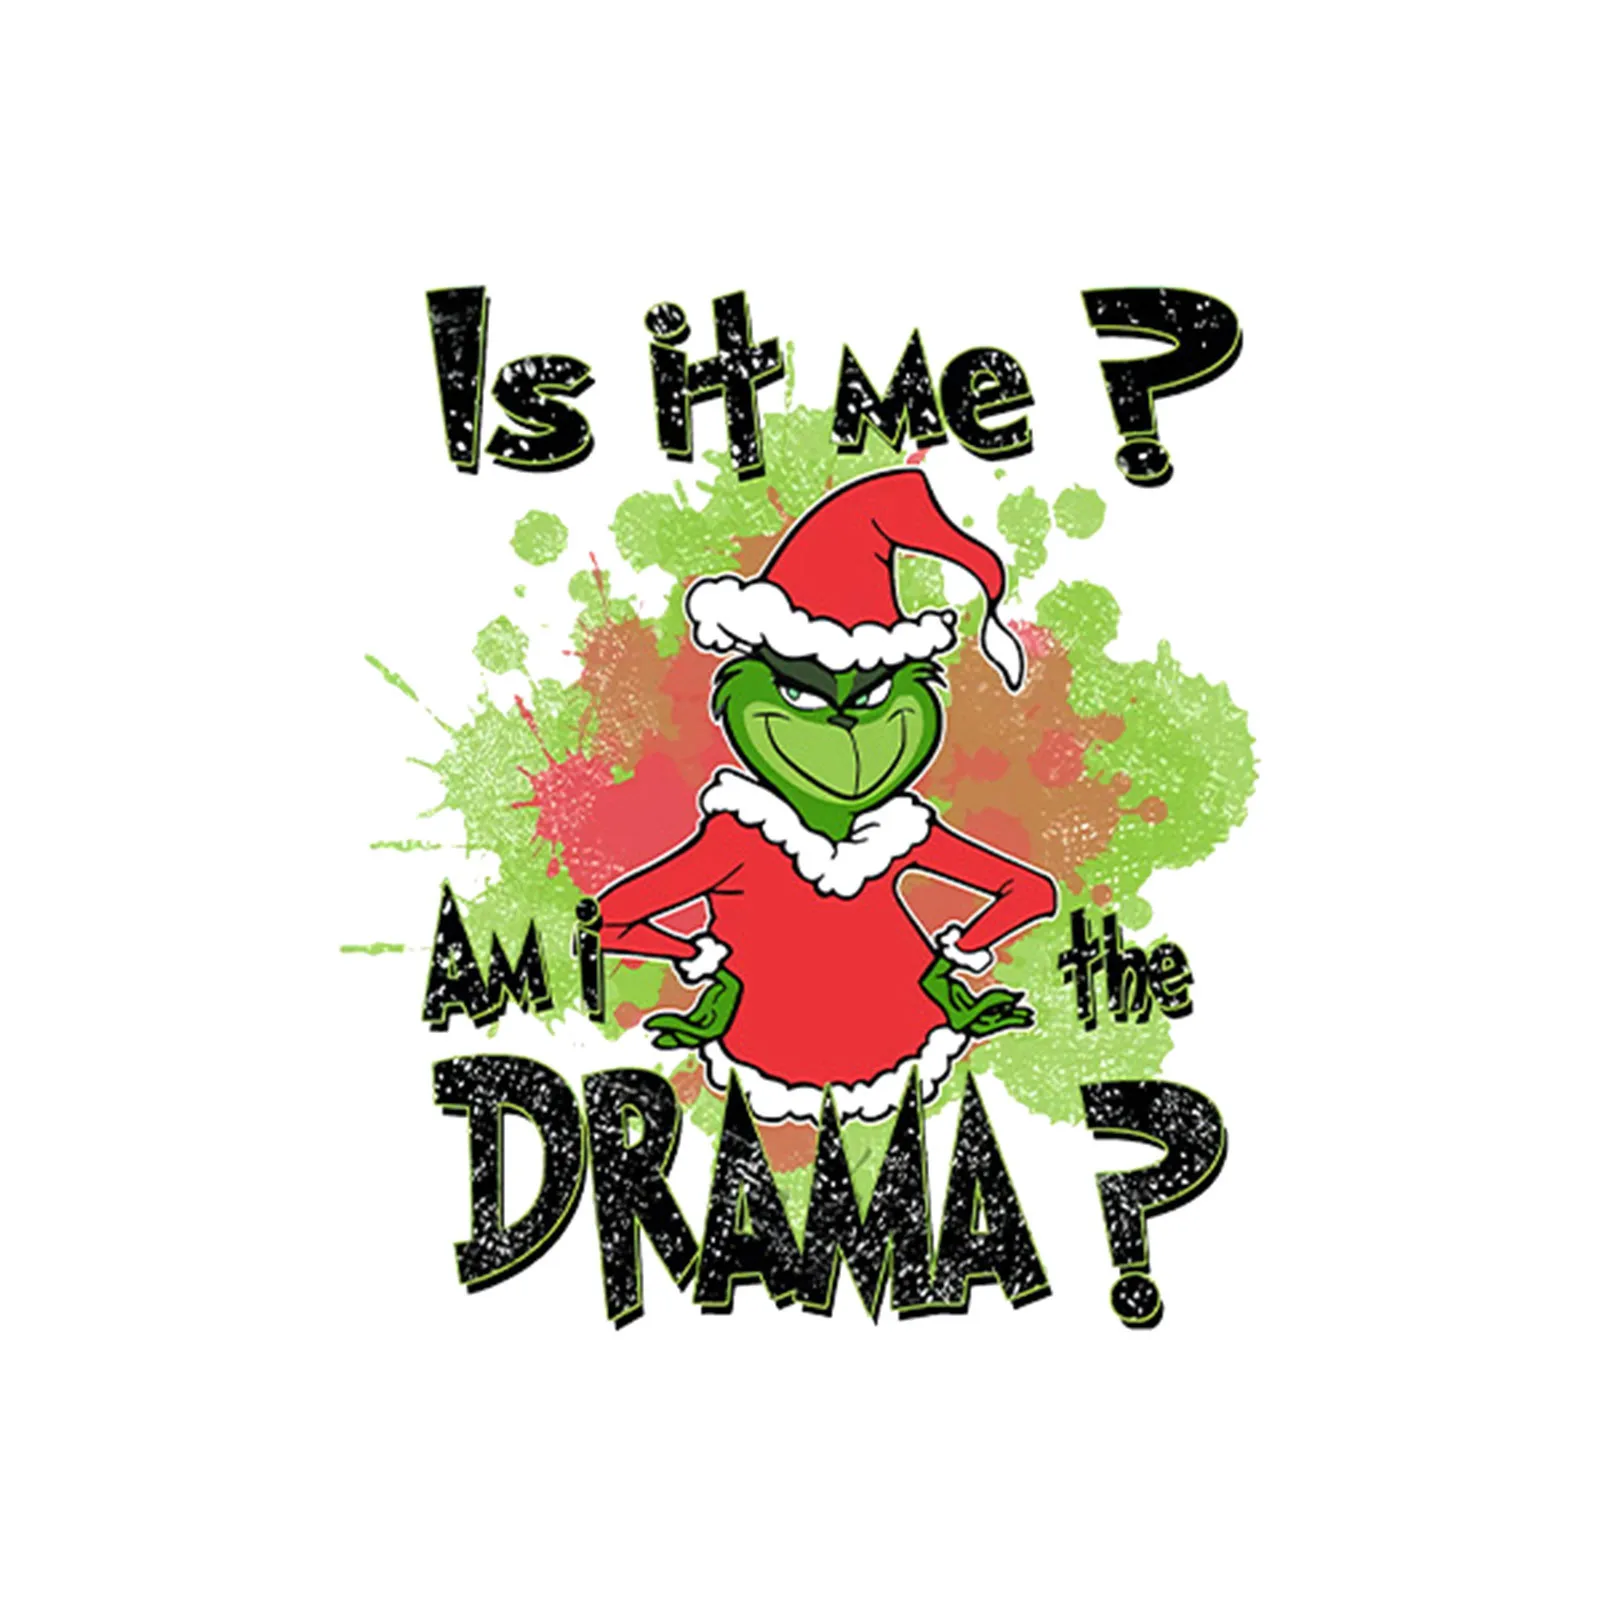 Grinch Iron Patch - Patches - Aliexpress - Grinch iron patch for you